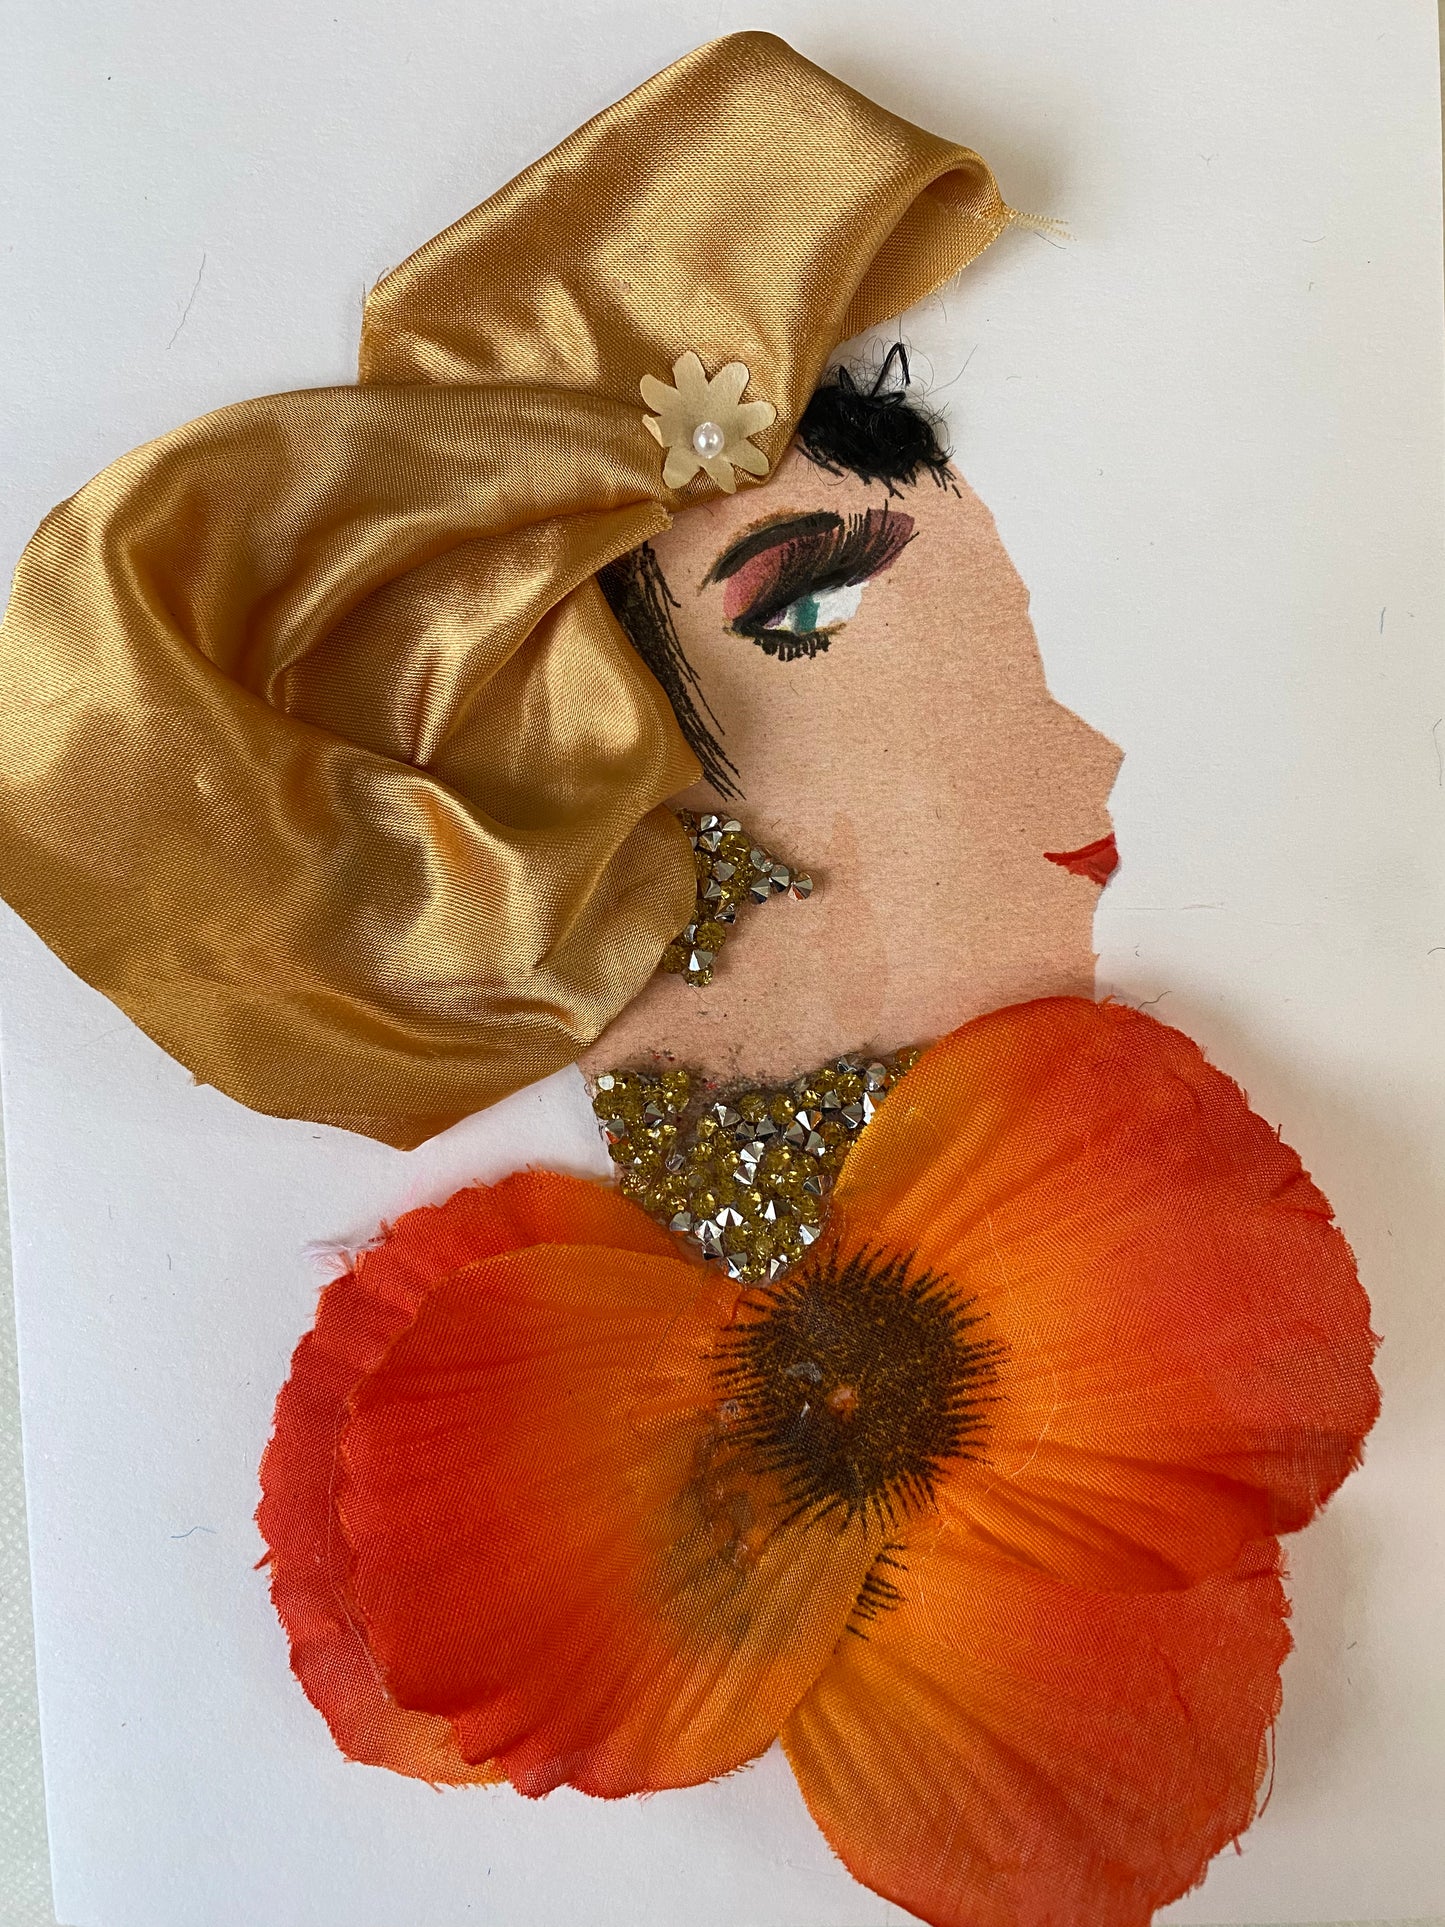 I designed this card of a woman named Tilly Tangerine. She has a white skin tone and wears a silky gold hat. She wears an orange floral blouse with gold and silver jewellery. 